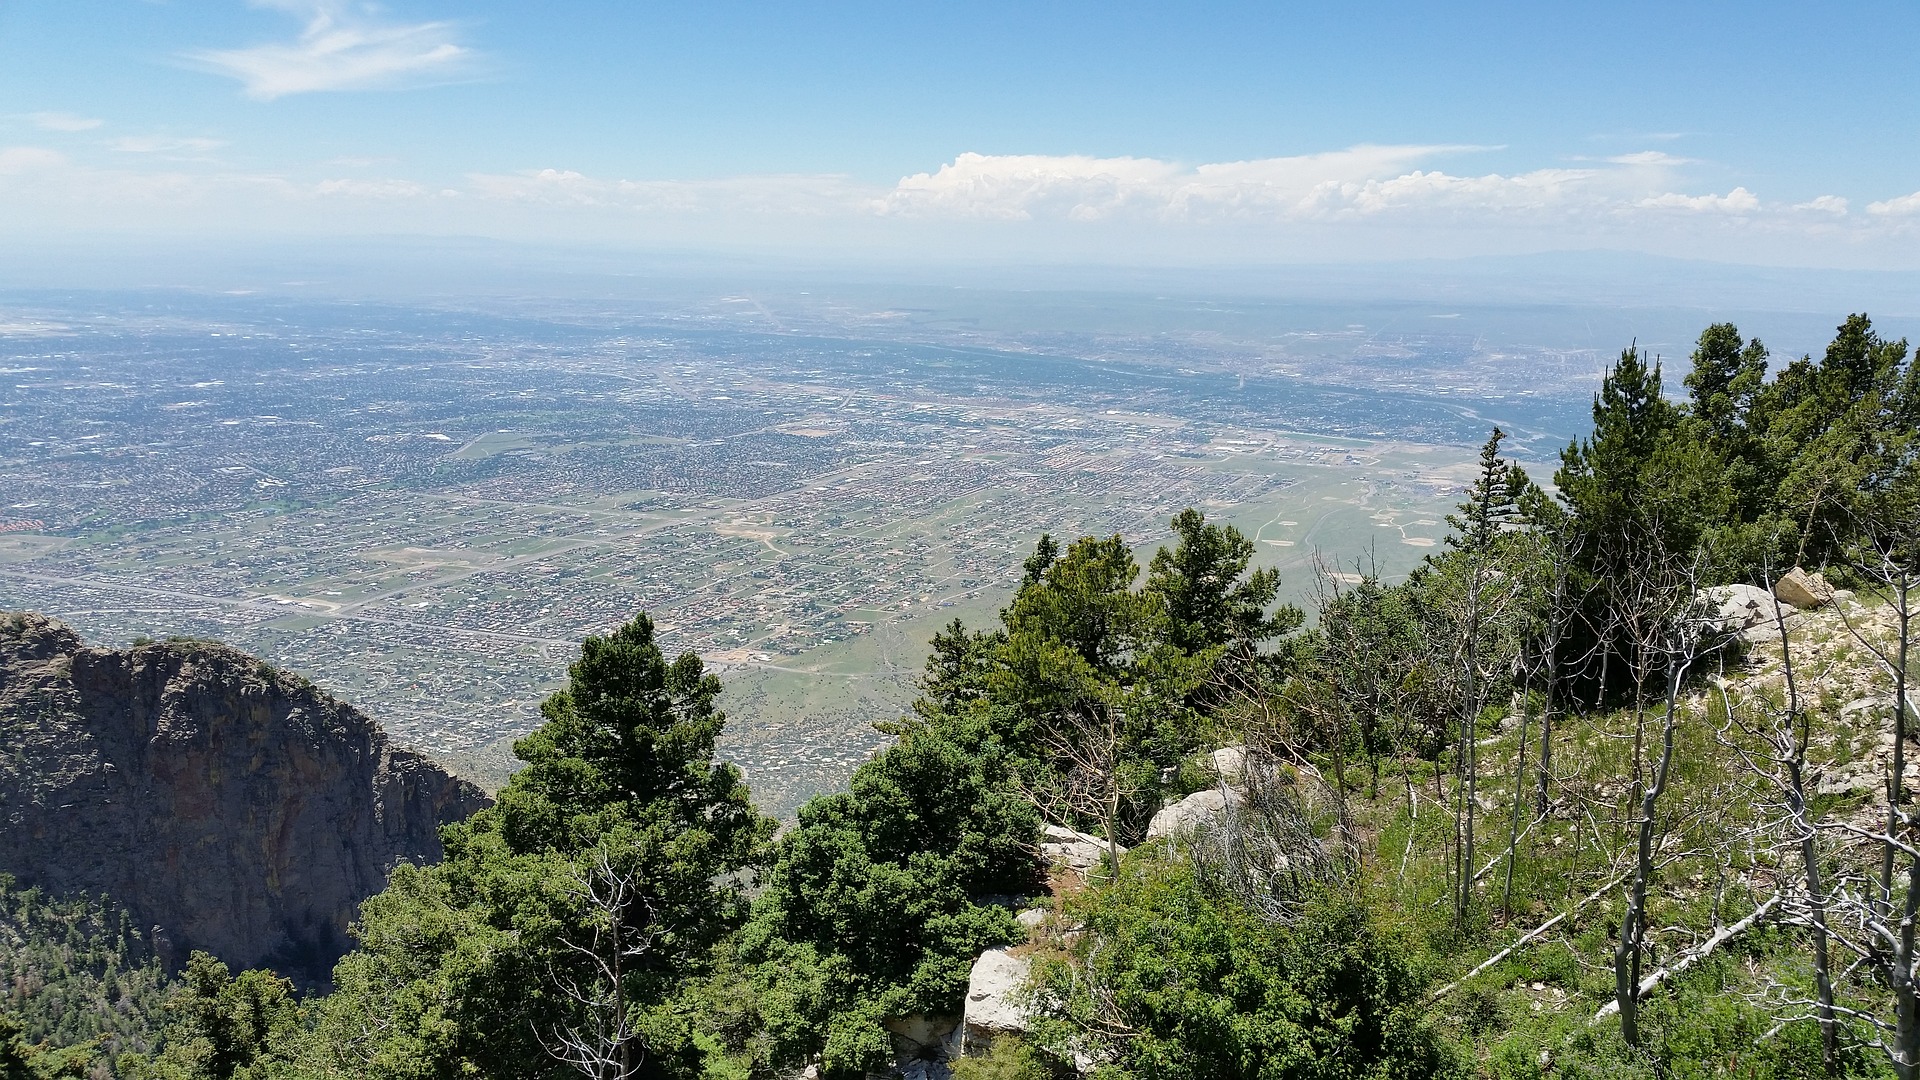 Daytime view of Albuquerque from top of the Sandia